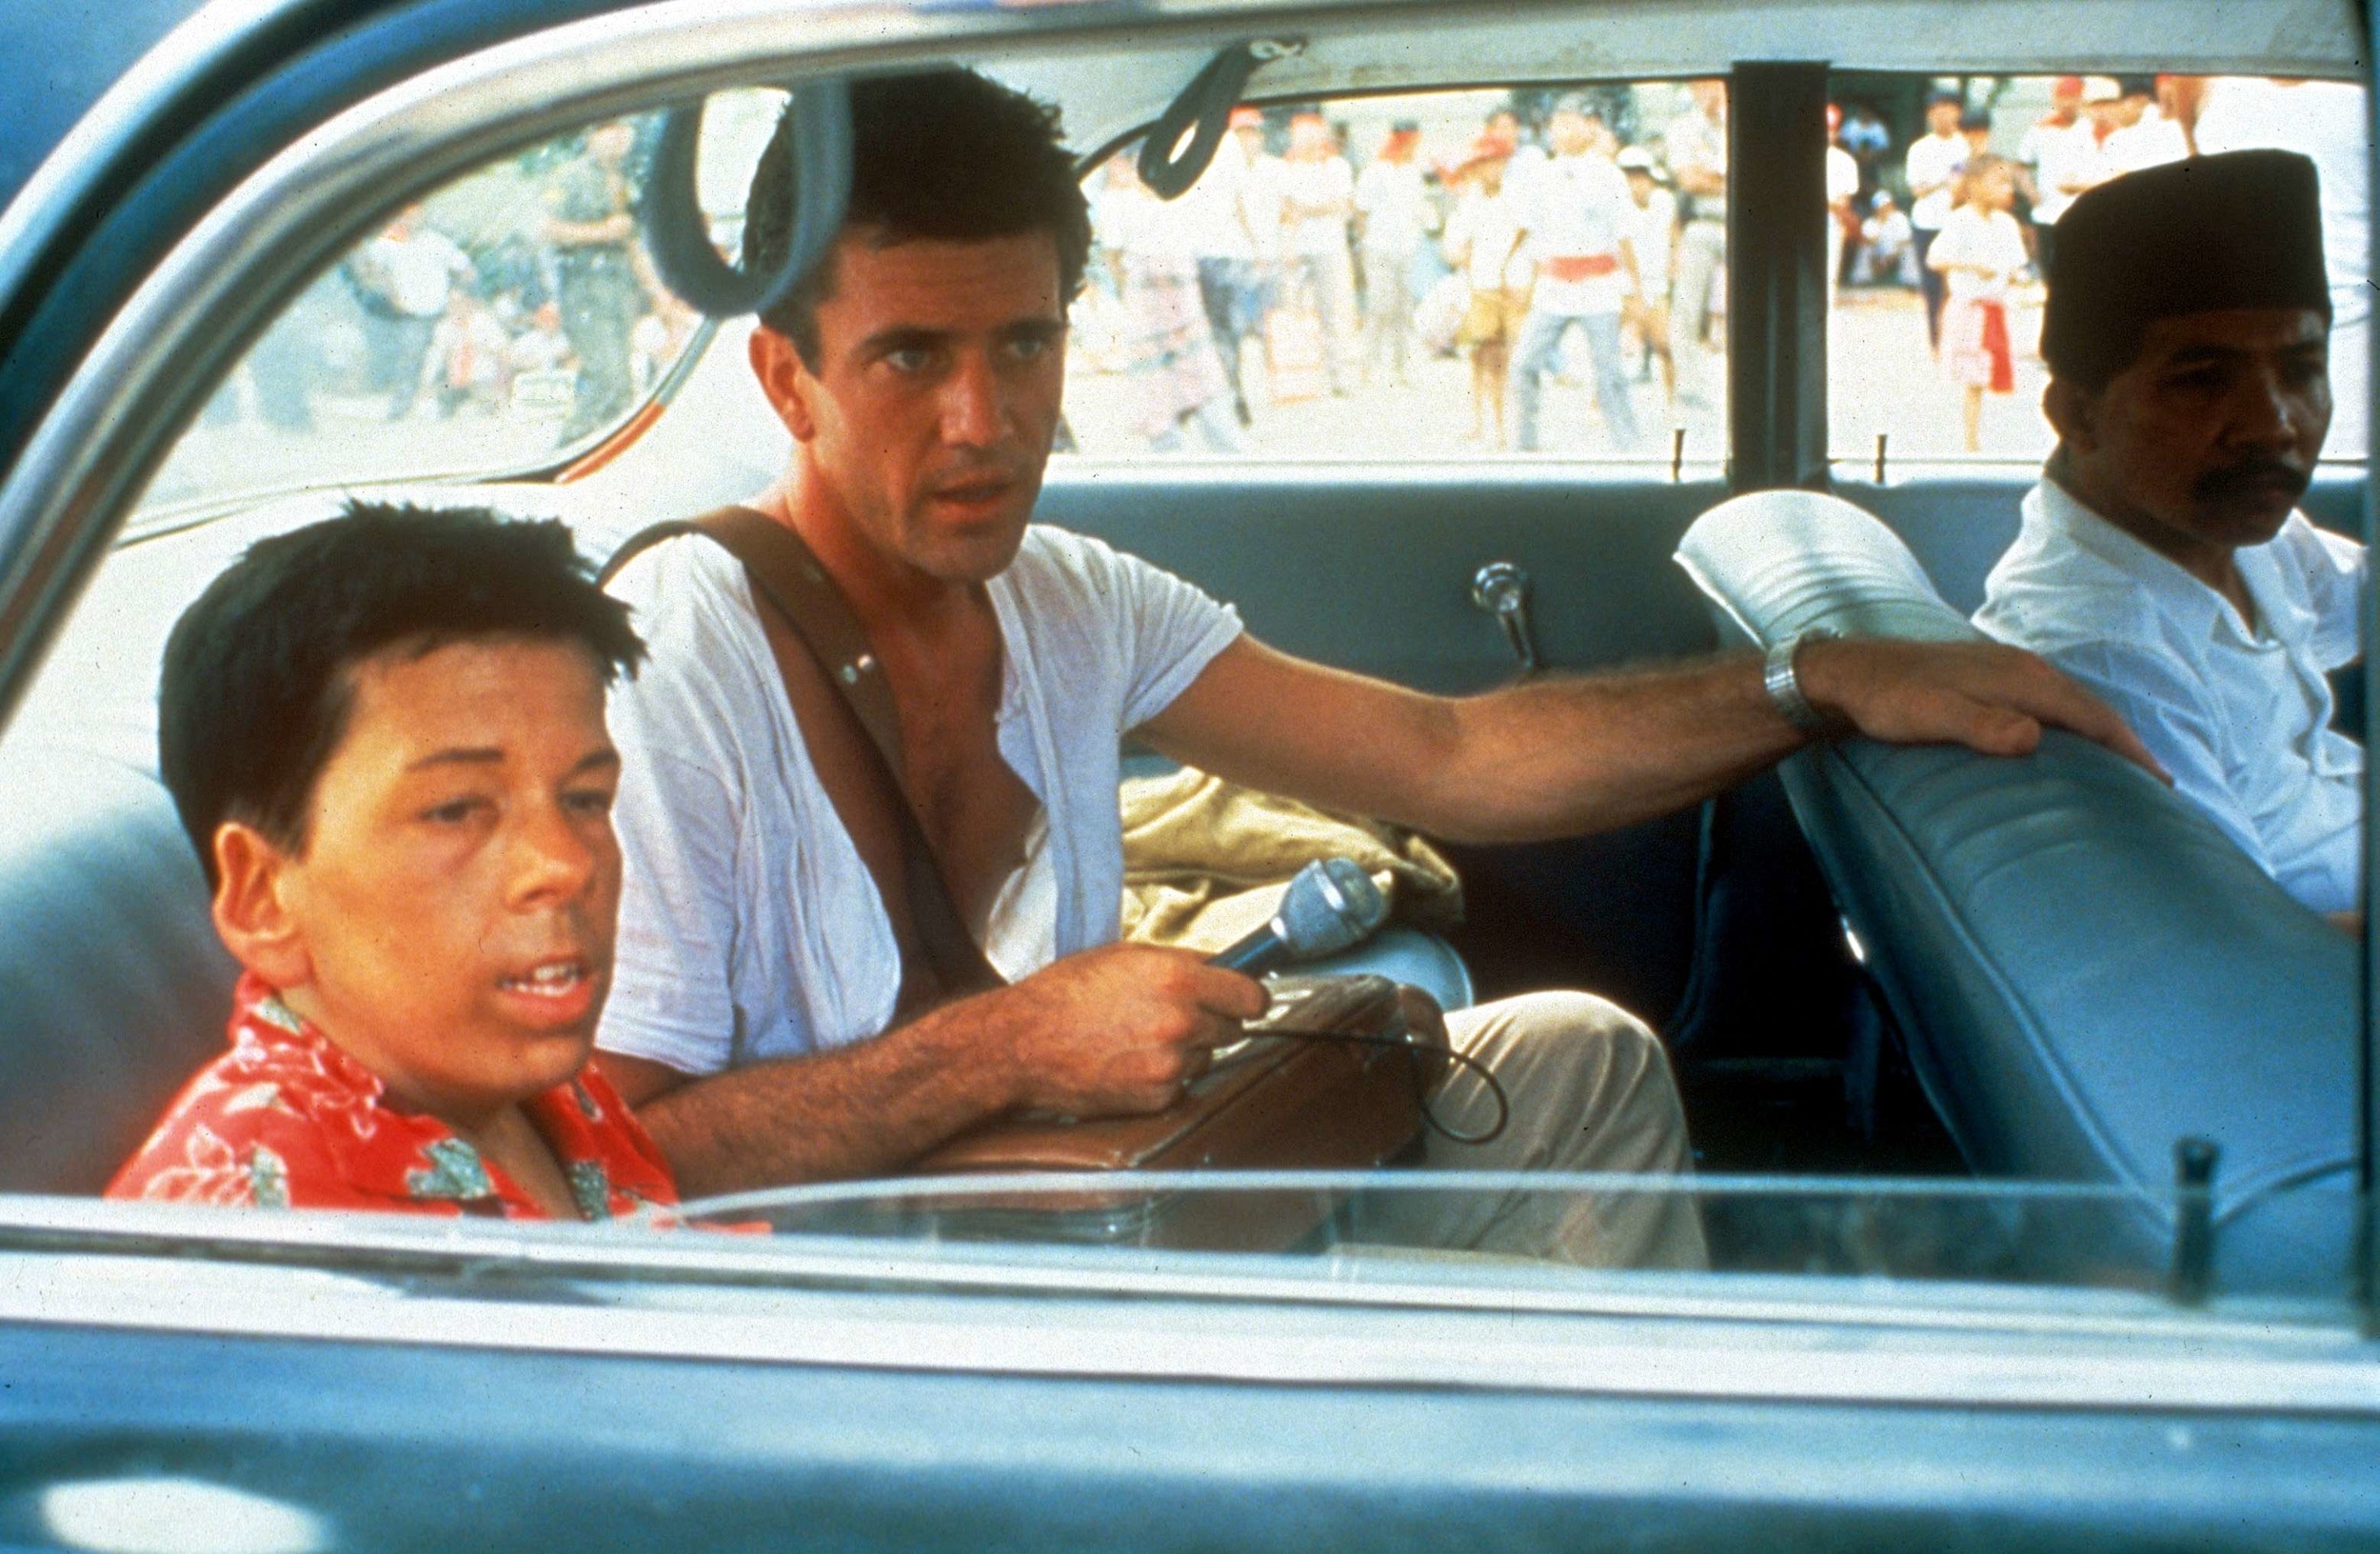 <p>The political dramas of the early-to-mid-‘80s were often big players at the Academy Awards, but most of them barely made a ripple at the box office. Though Peter Weir’s “The Year of Living Dangerously” went a long way toward cementing Mel Gibson’s leading man appeal, it wasn’t a hit at the time and doesn’t get nearly enough love nowadays. Gibson and Sigourney Weaver are smoldering as a journalist and government official caught up in the Indonesian upheaval, but the heart of the movie is Linda Hunt, who won Best Supporting Actress for her gender-swapped turn as the politically involved facilitator, Billy Kwan. This is no stunt performance. It’s a fiery portrayal of a man repulsed by the corruption of the Sukarno regime.</p><p>You may also like: <a href='https://www.yardbarker.com/entertainment/articles/25_songs_that_are_synonymous_with_summer/s1__37630763'>25 songs that are synonymous with summer</a></p>